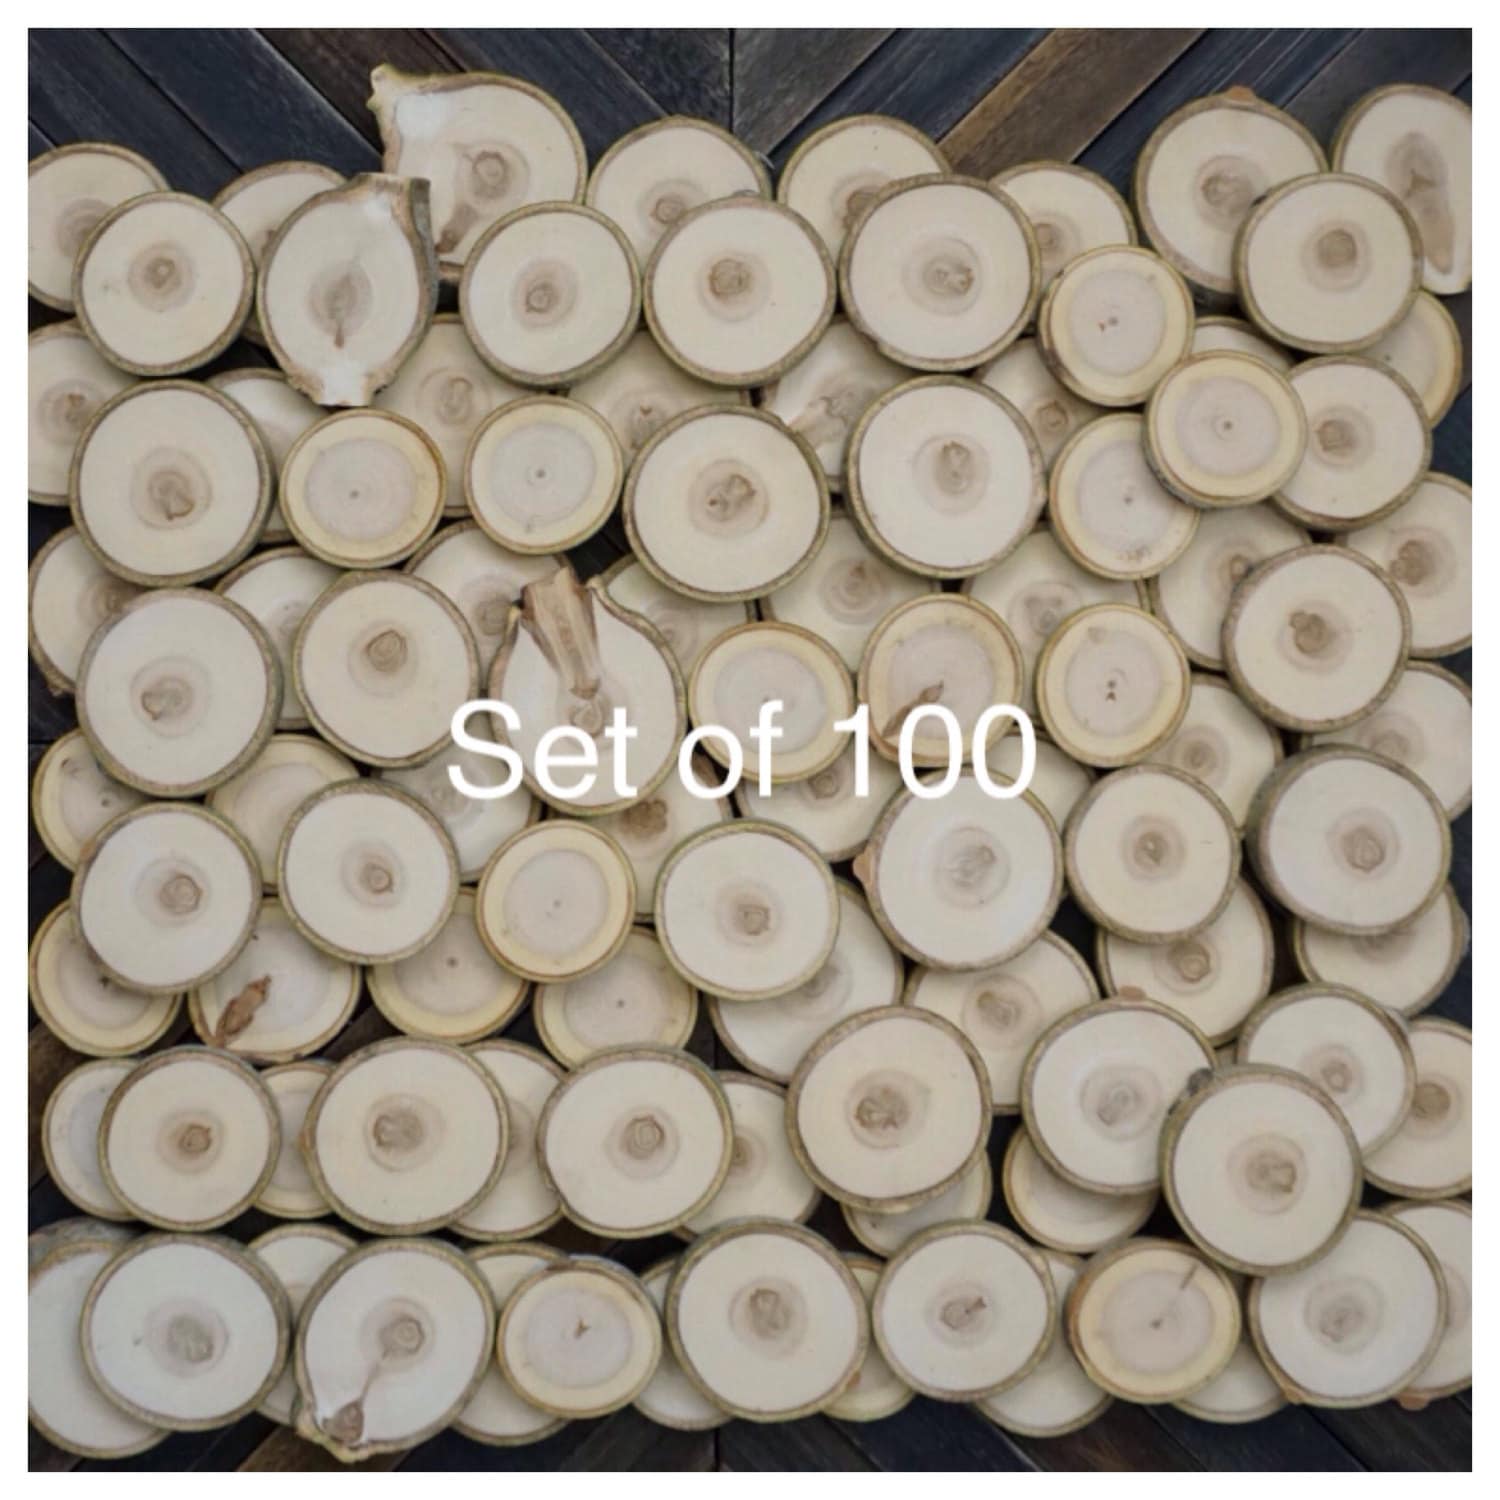 Set of 8-9 Inch Rustic Wood Slices Baby Shower Centerpieces Woodland Theme  Baby Shower Decor, Rustic Events Decor, Wood Slices Bulk 